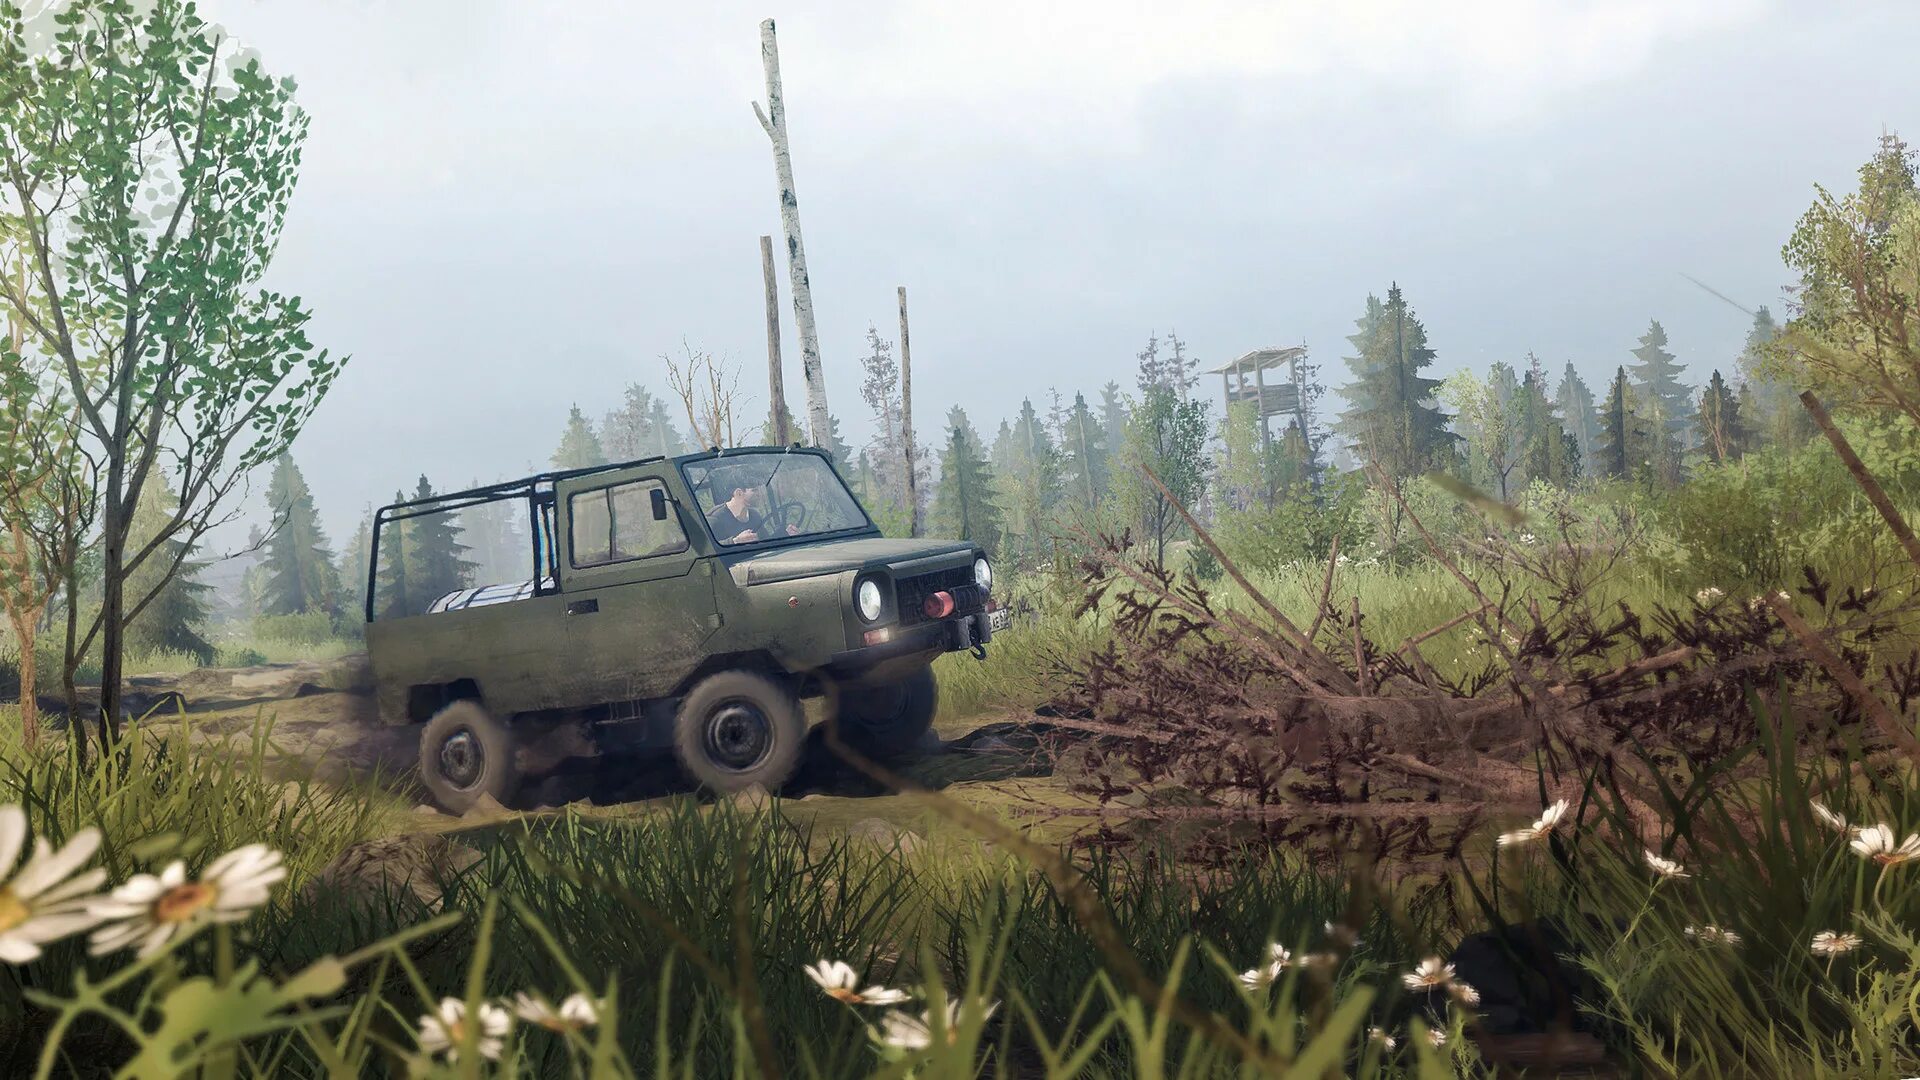 Expeditions a mudrunner game прохождение. ЛУАЗ 969 А MUDRUNNER. SPINTIRES Mud Runner. Игра Spin Tires MUDRUNNER. MUDRUNNER Скриншоты.